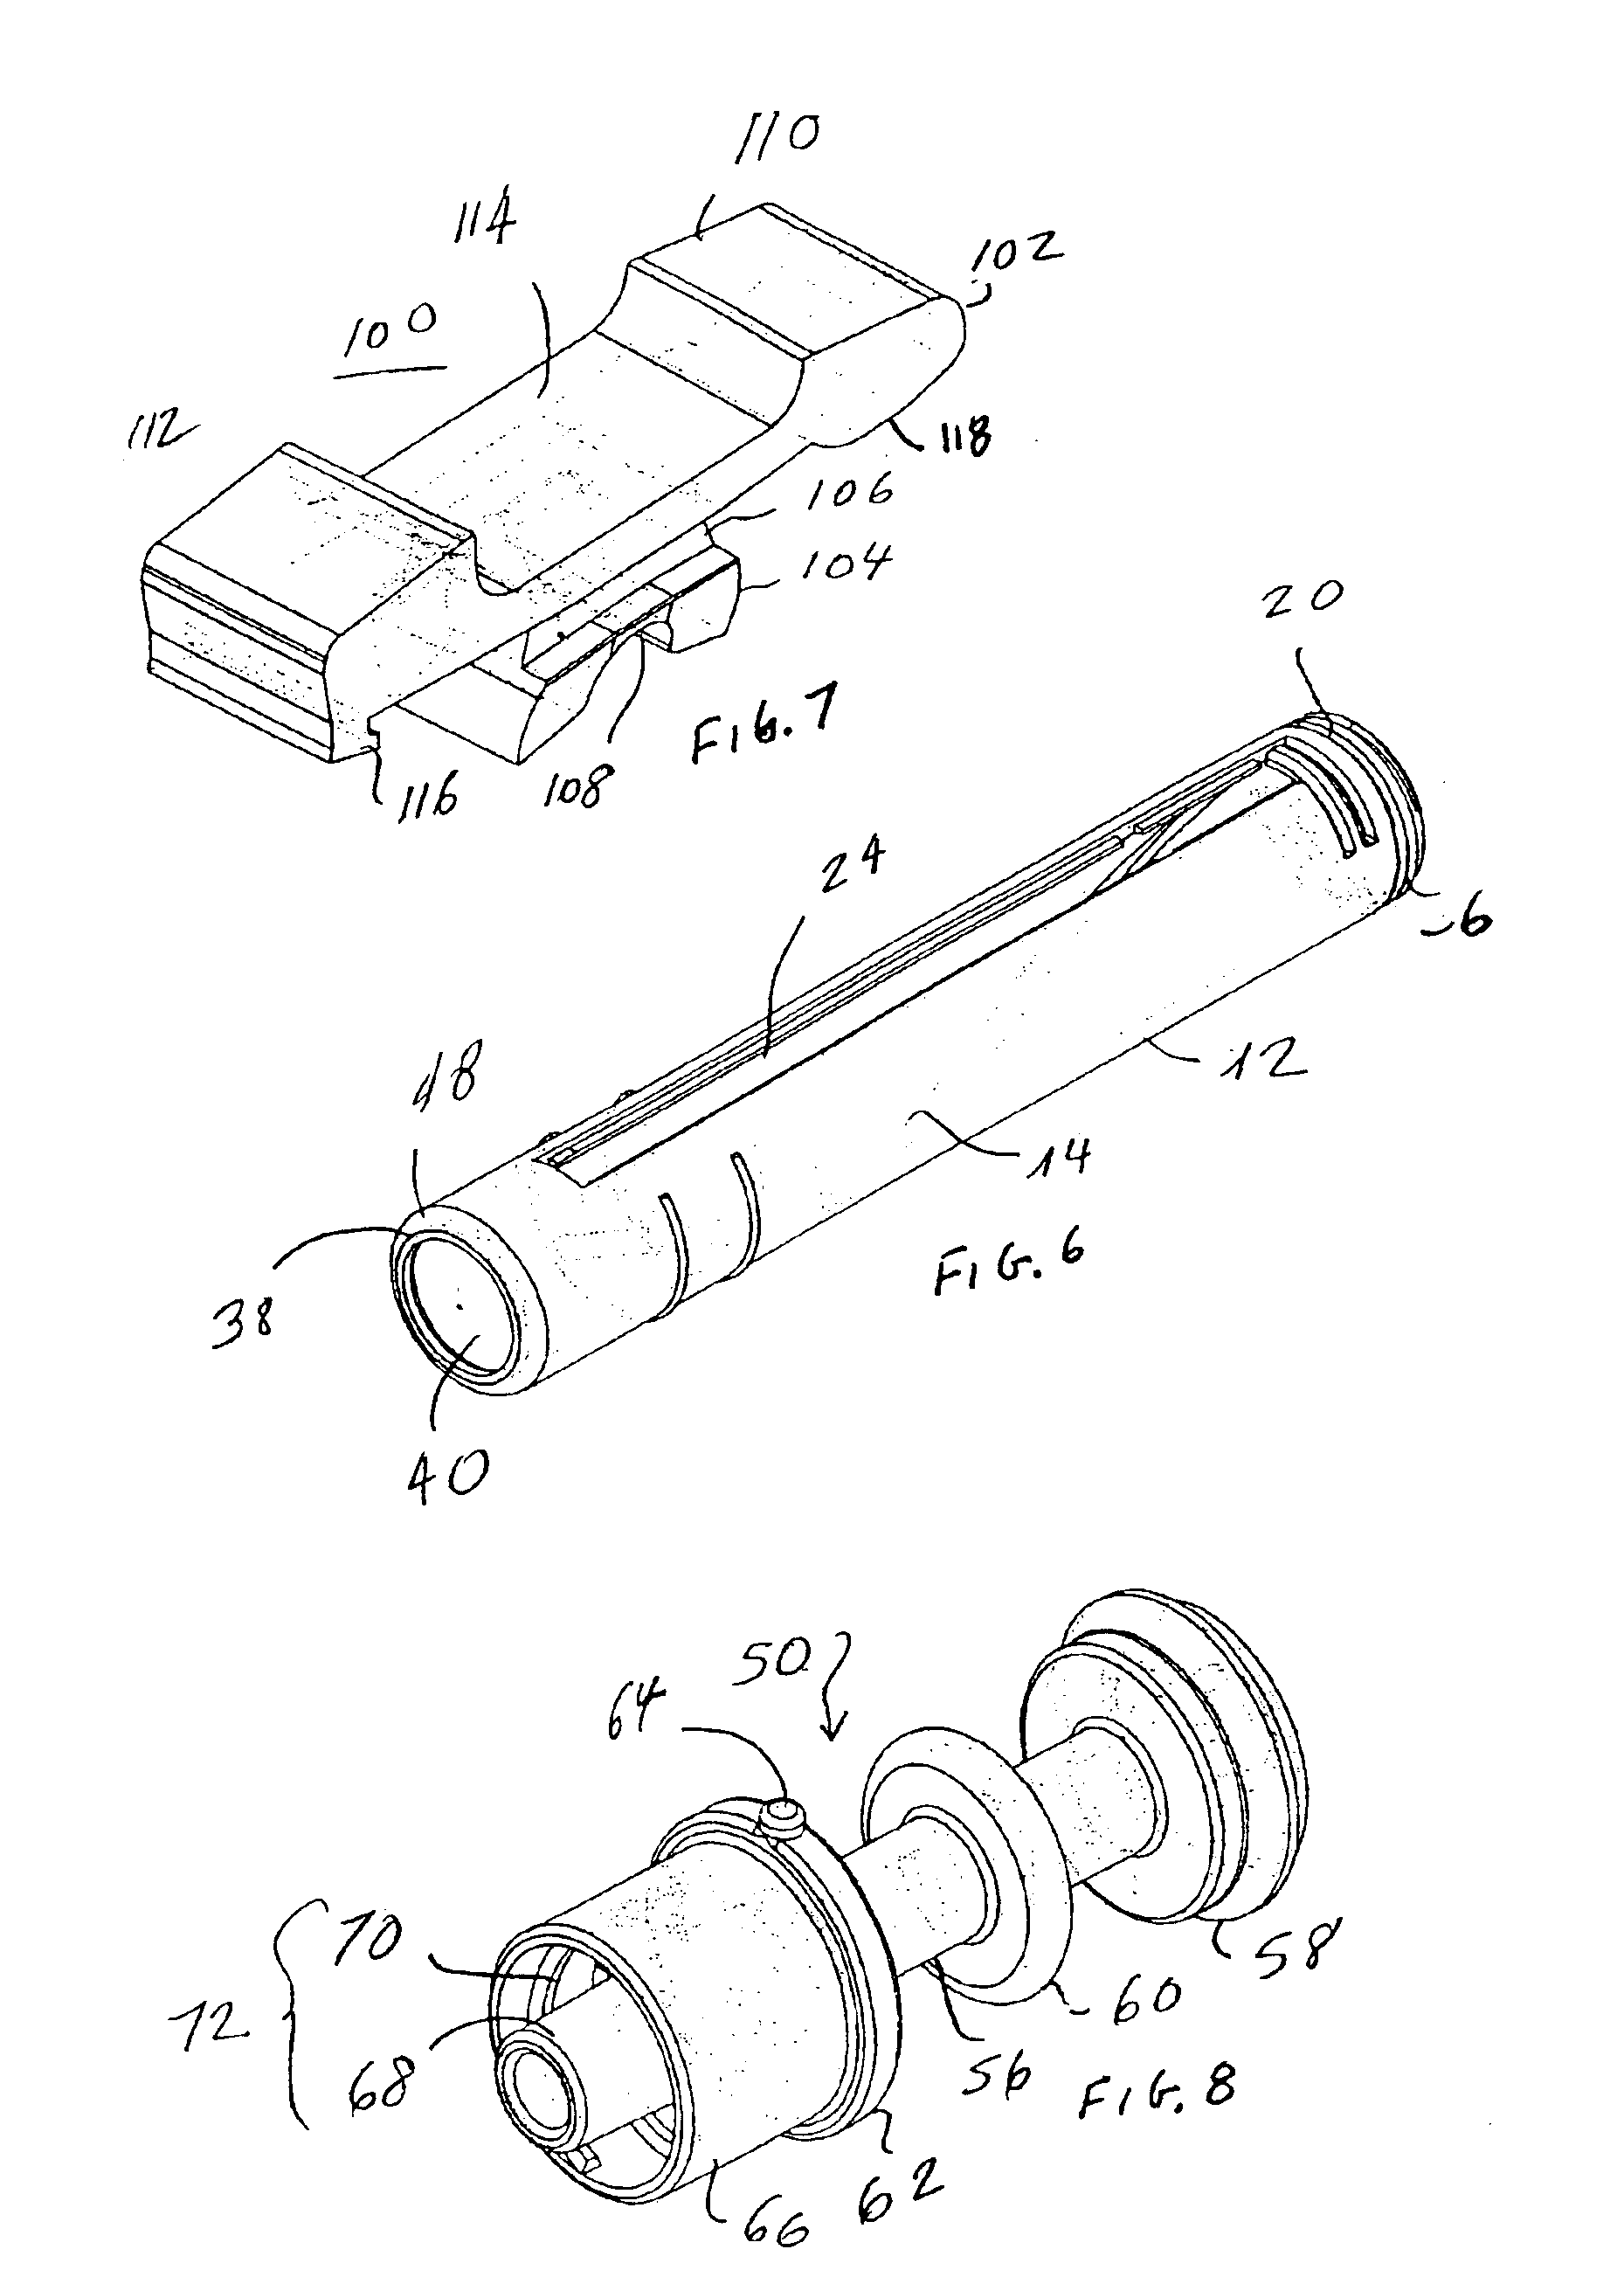 Safety IV catheter infusion device